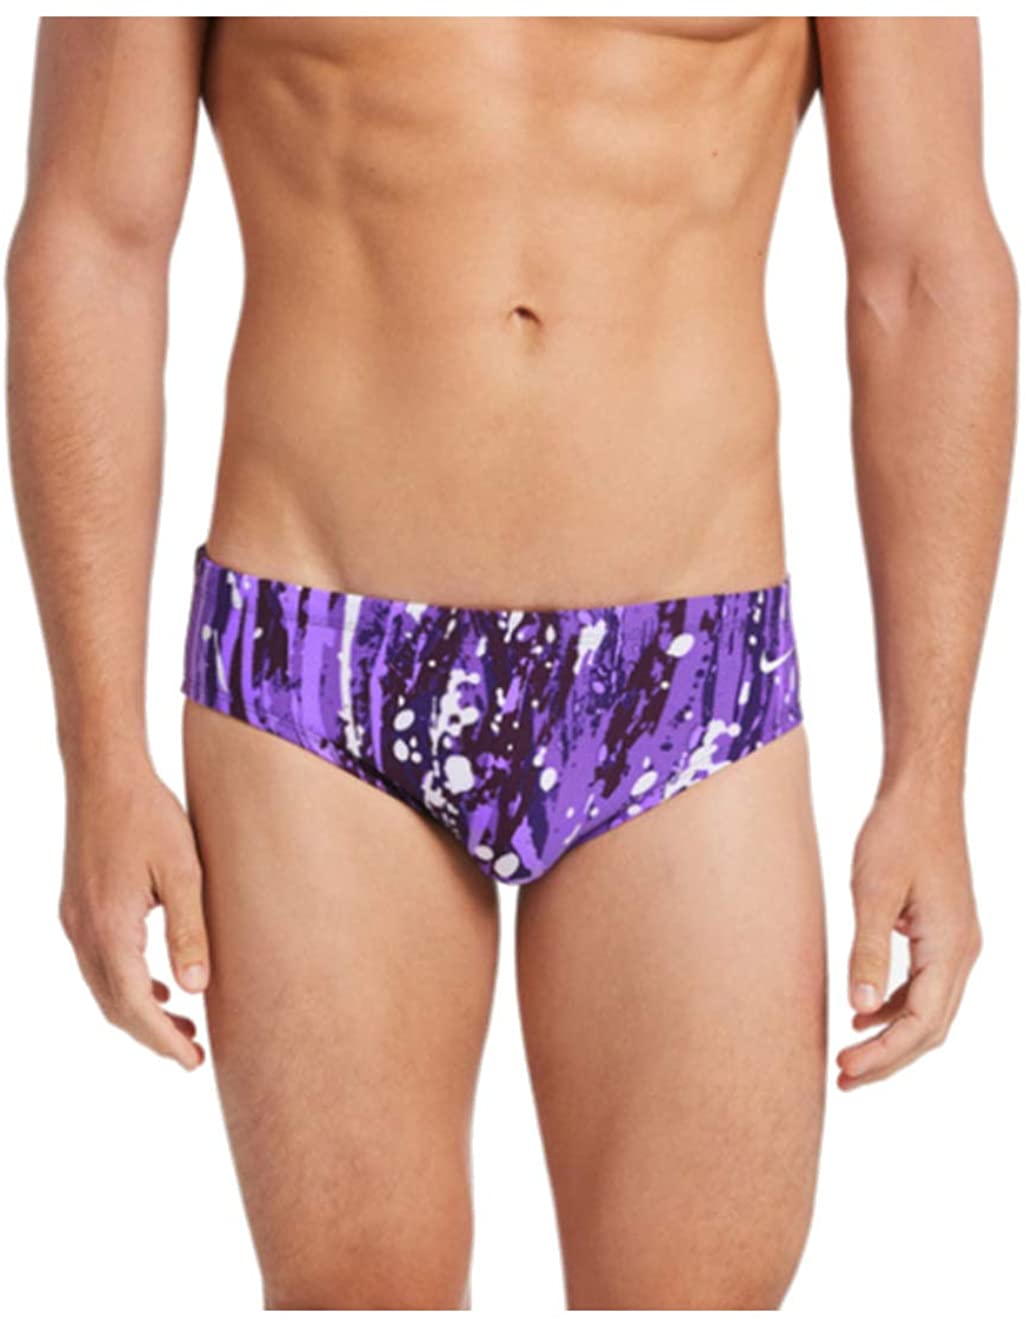 Nike Swim Men's Brief in Court Purple color from the front